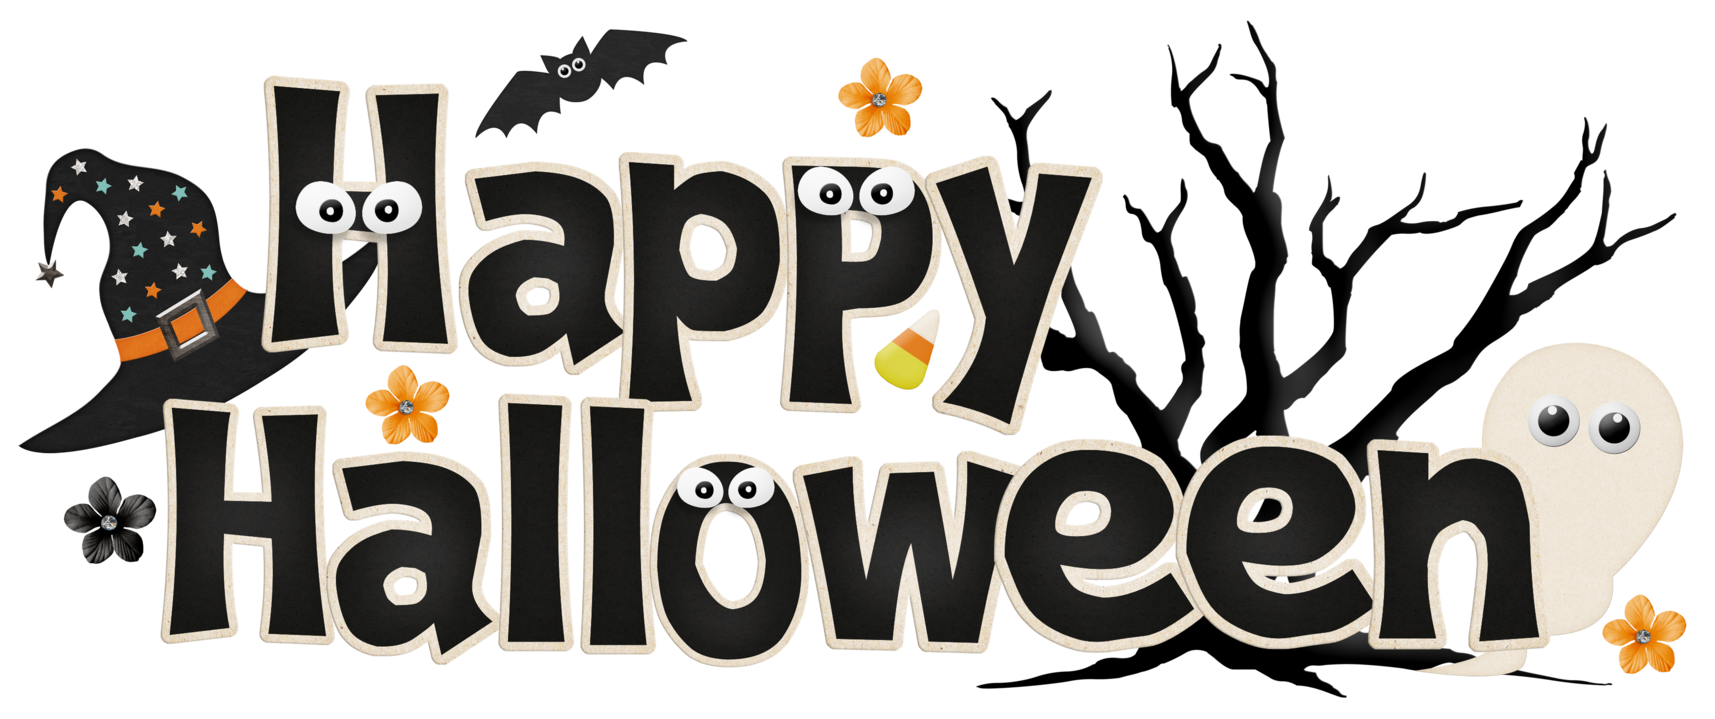 Free Word Halloween Cliparts, Download Free Clip Art, Free